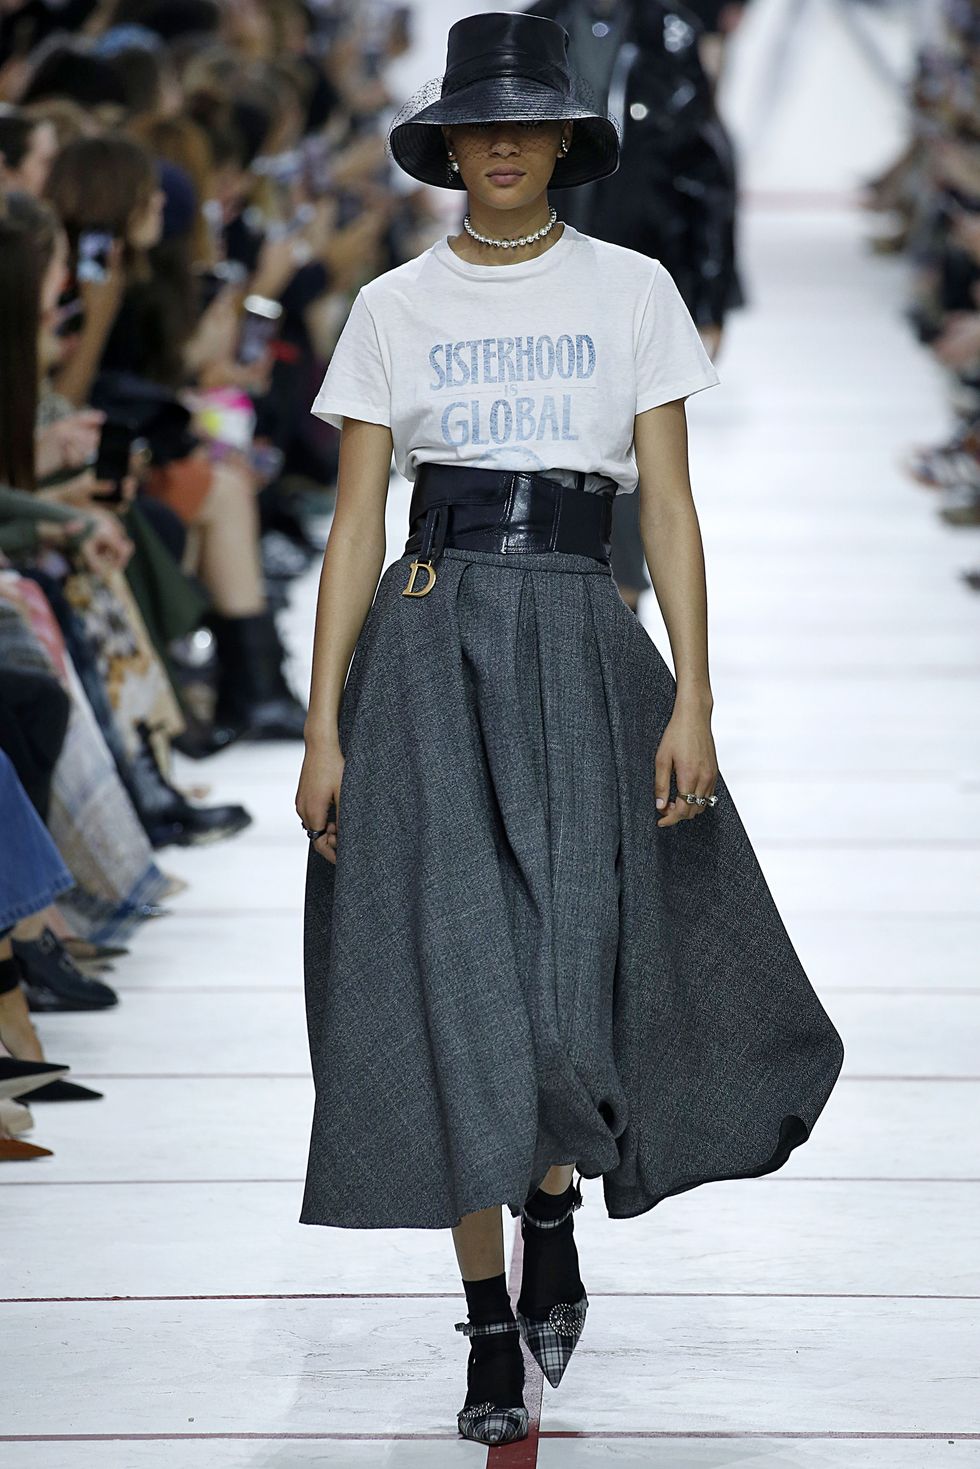 Christian Dior Fall 2019 Ready-to-Wear collection, runway looks